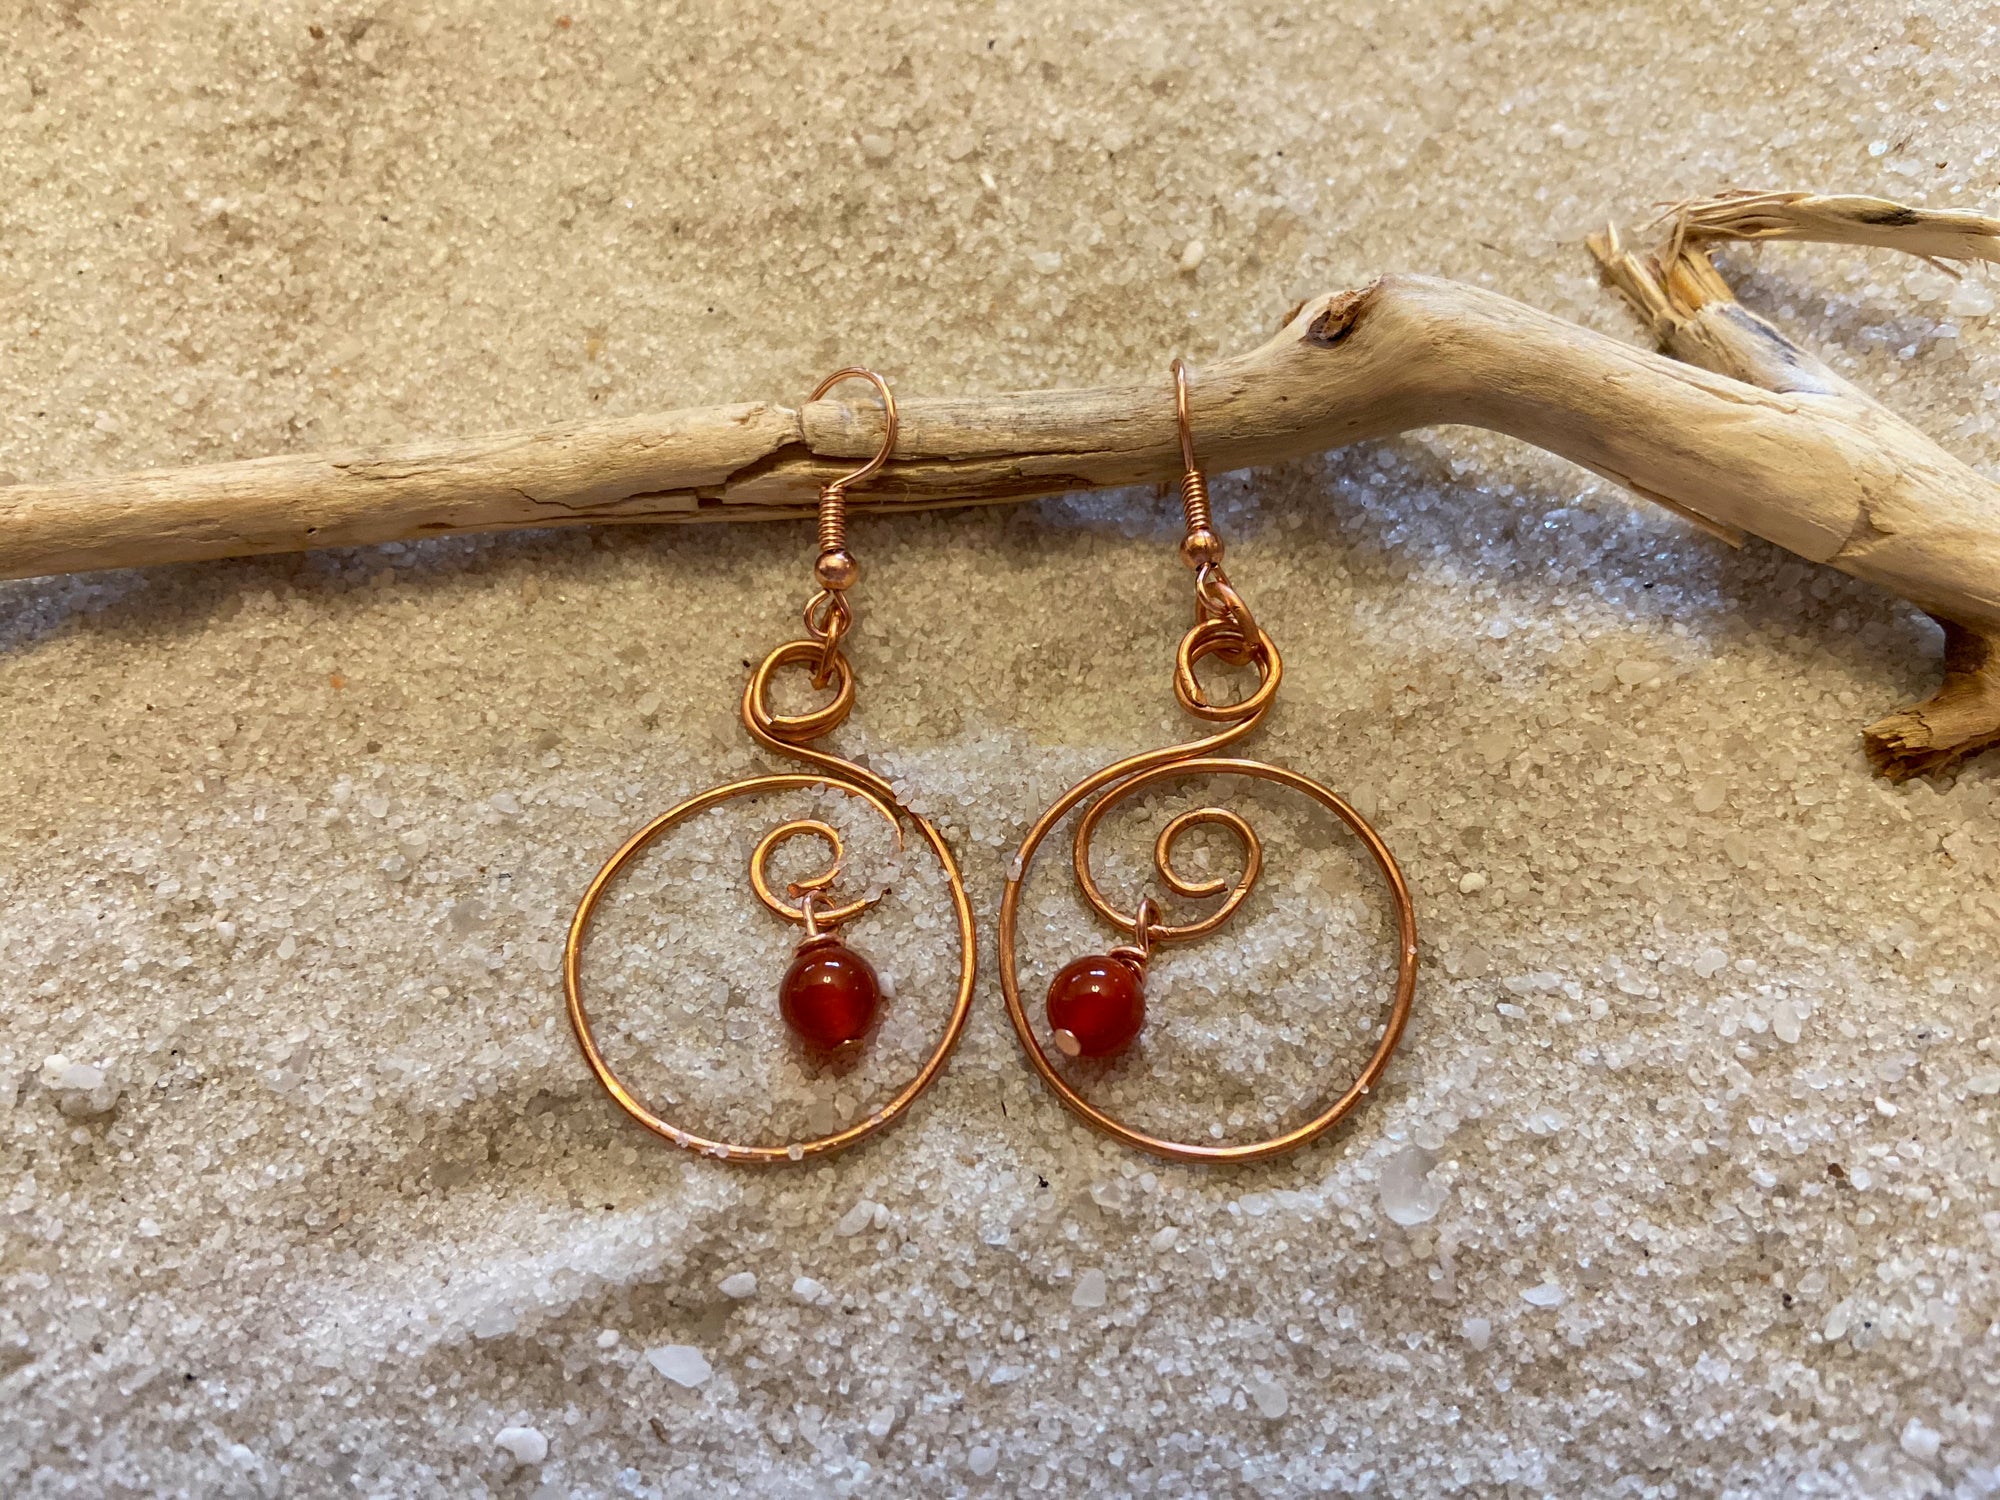 B. Light Earring - Copper Swirled Wire Earrings with Ruby Red Glass Accents